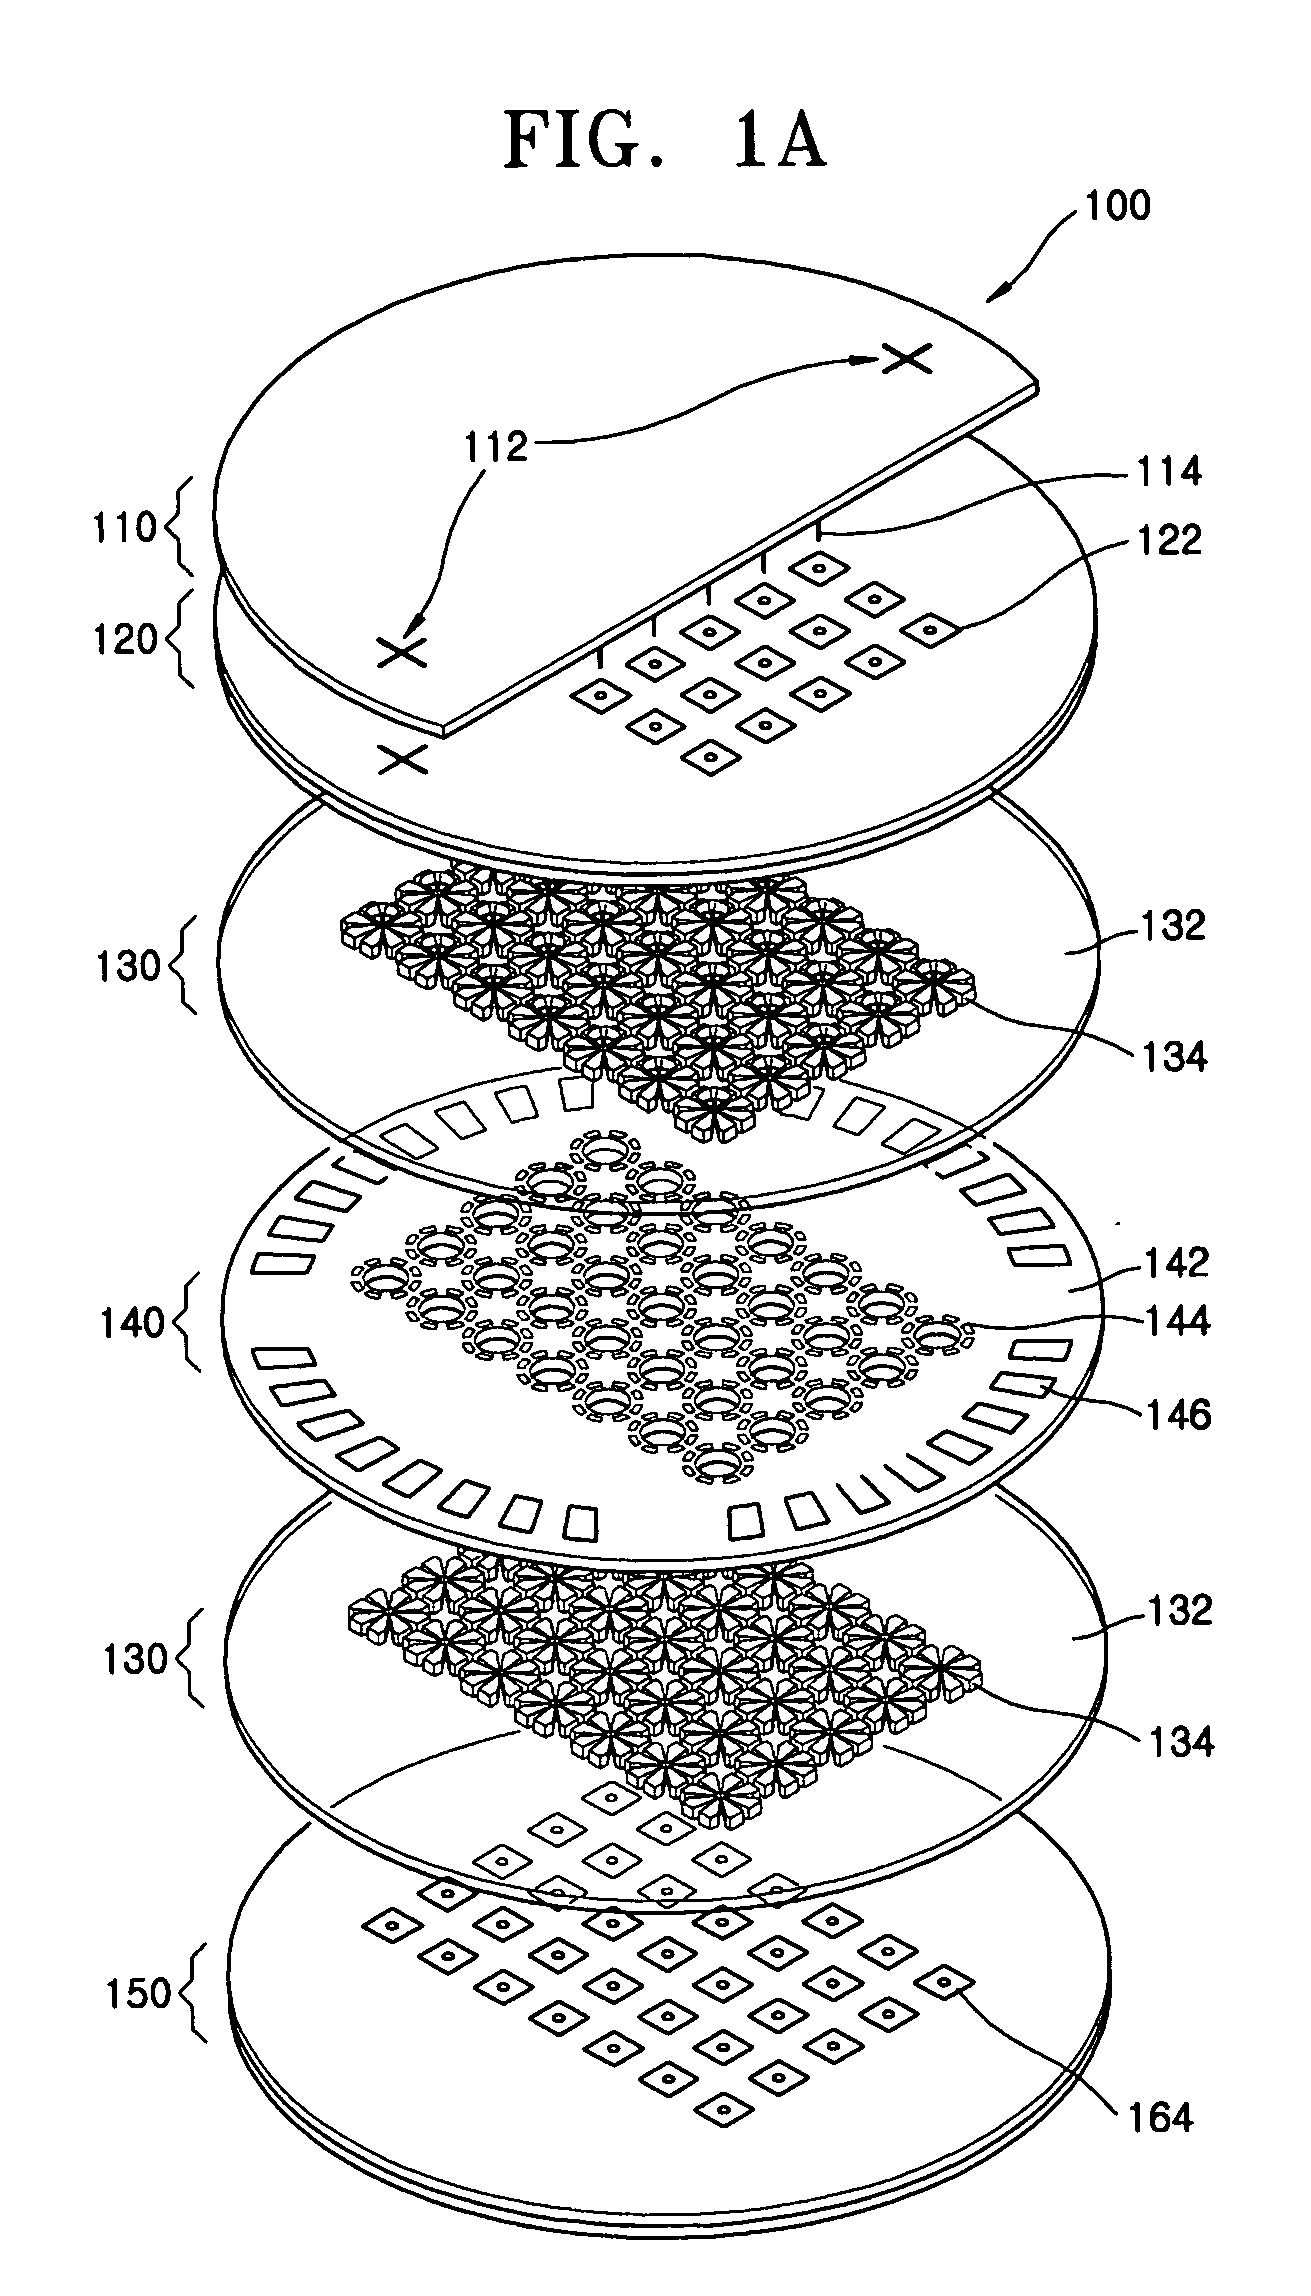 Wafer-scale microcolumn array using low temperature co-fired ceramic substrate